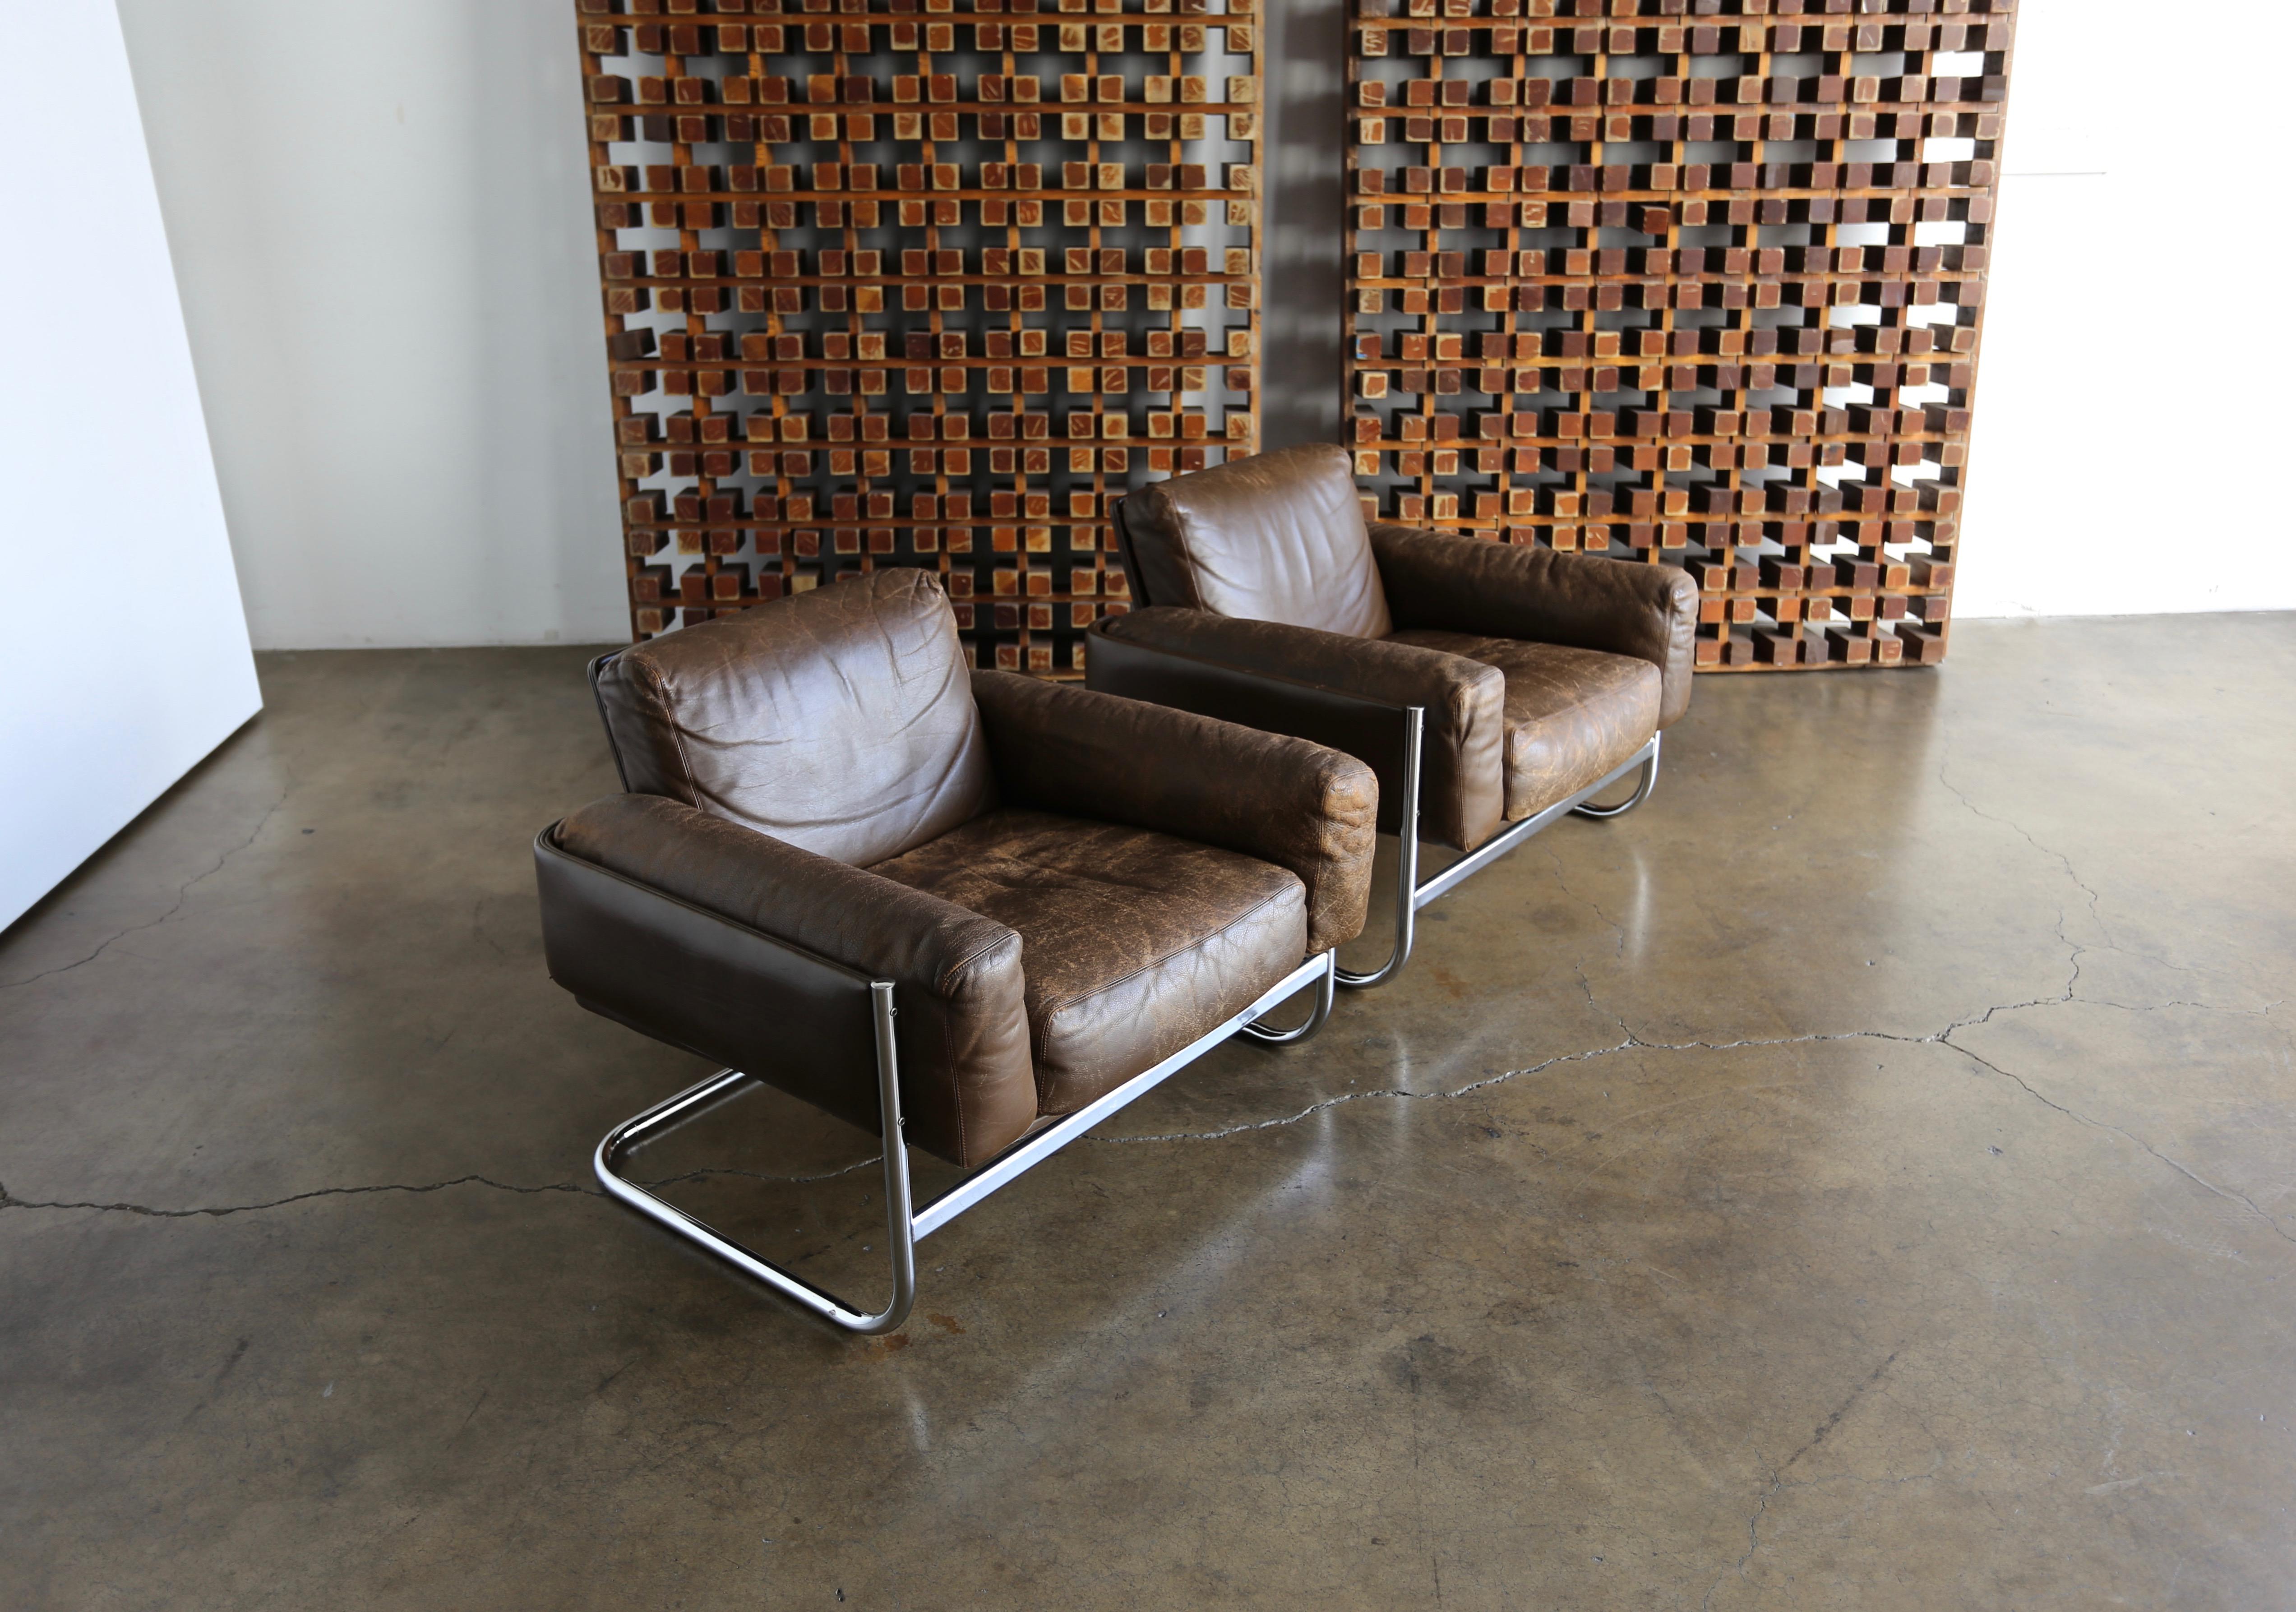 Pair of leather and chrome lounge chairs by Sven Ivar Dysthe for Dokka, circa 1967. Nice patina to the original brown leather.